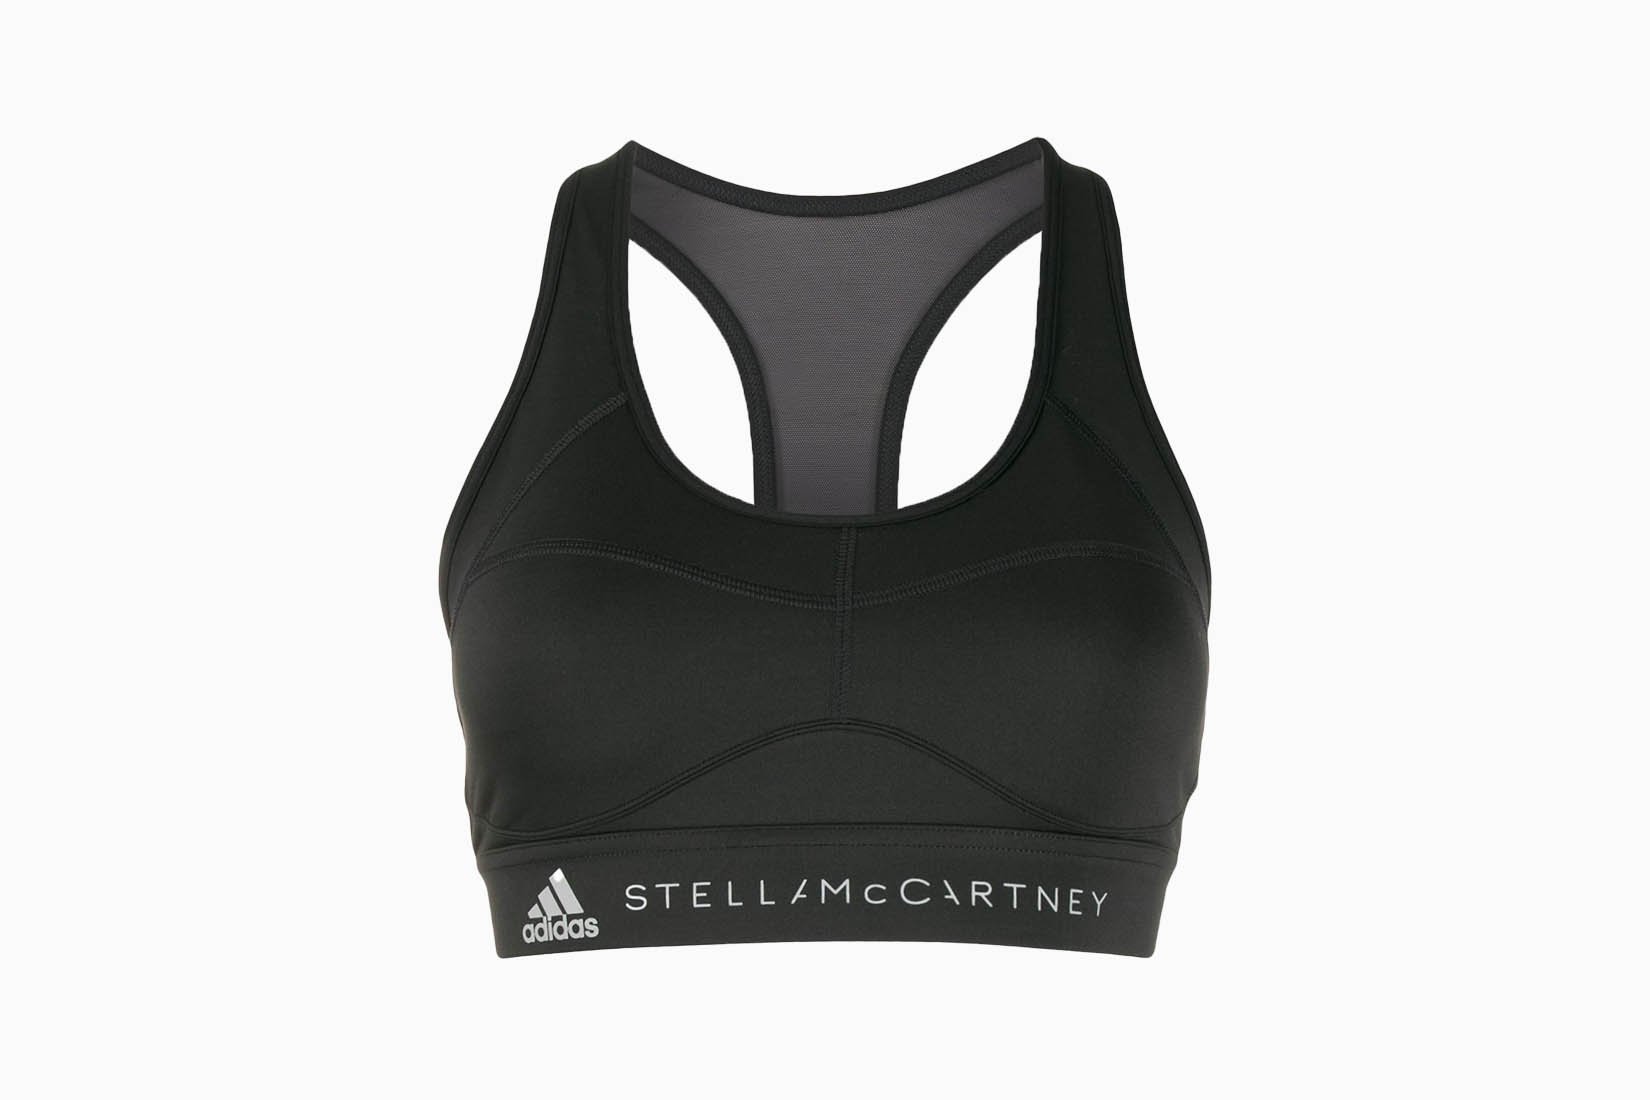 19 Best Sports Bras: Find The Right Sports Bra For Your Workout (2022)